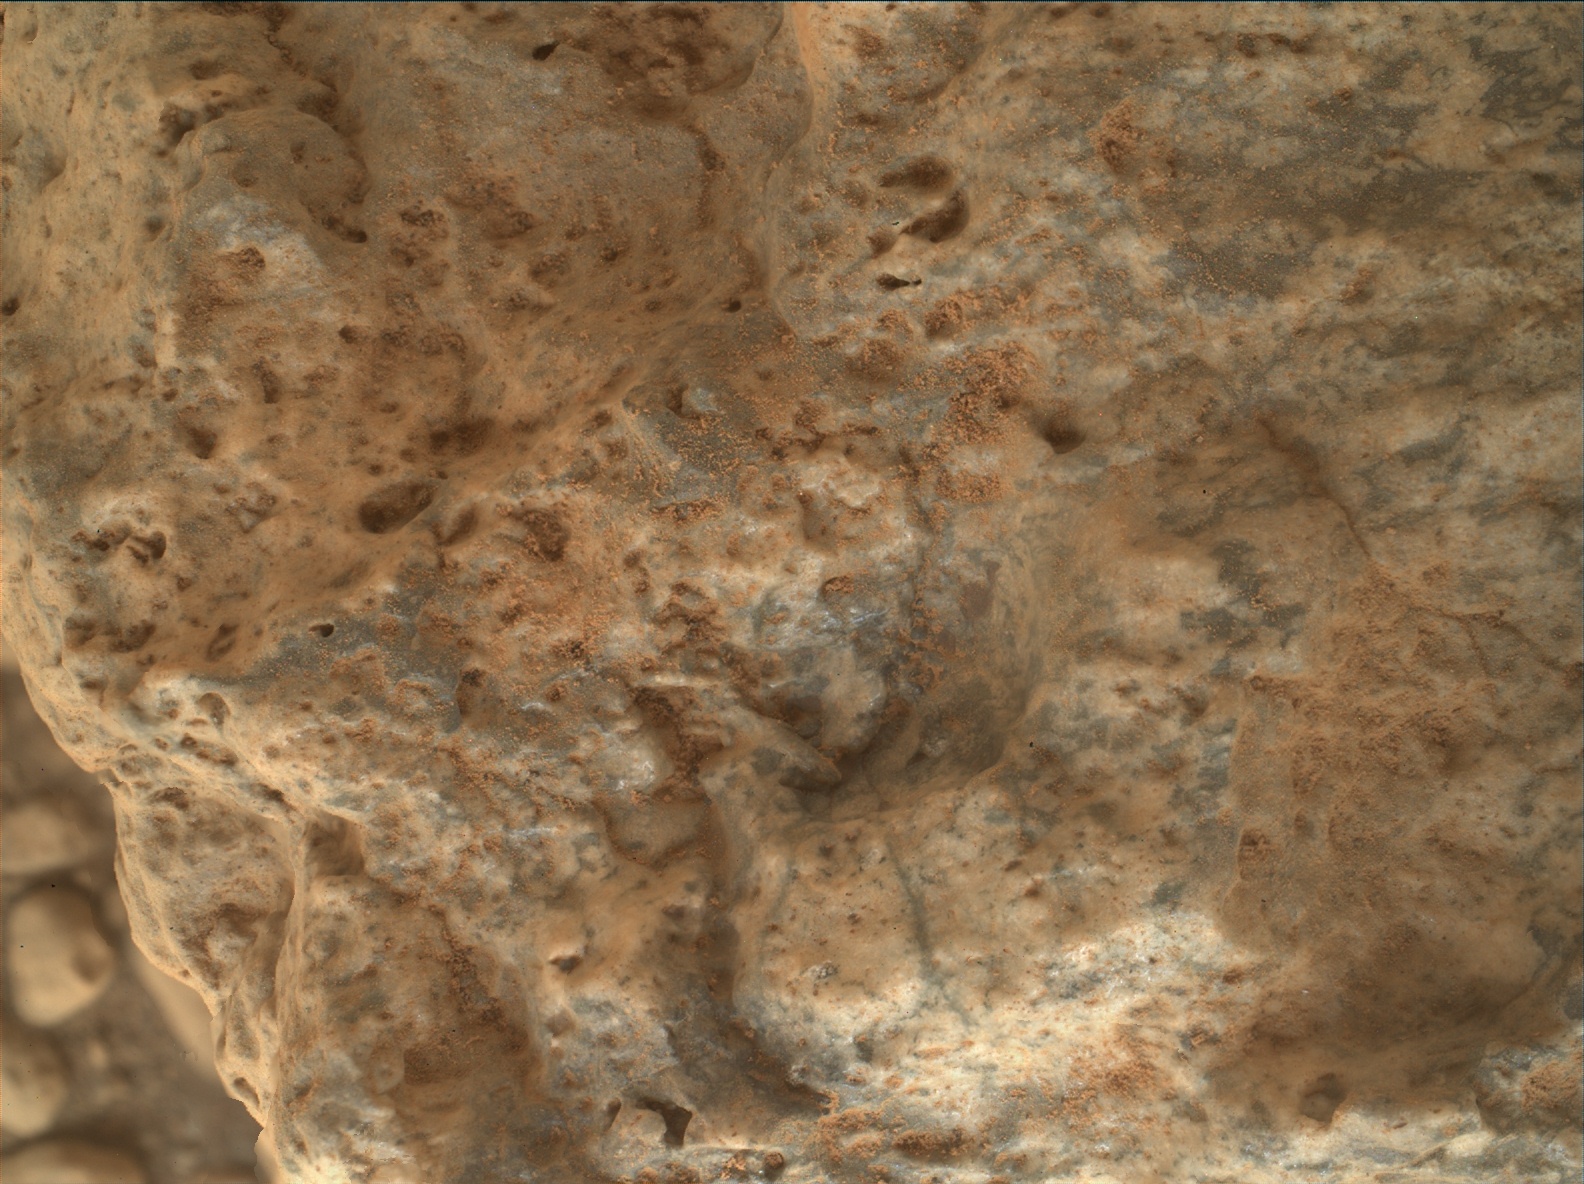 Nasa's Mars rover Curiosity acquired this image using its Mars Hand Lens Imager (MAHLI) on Sol 512